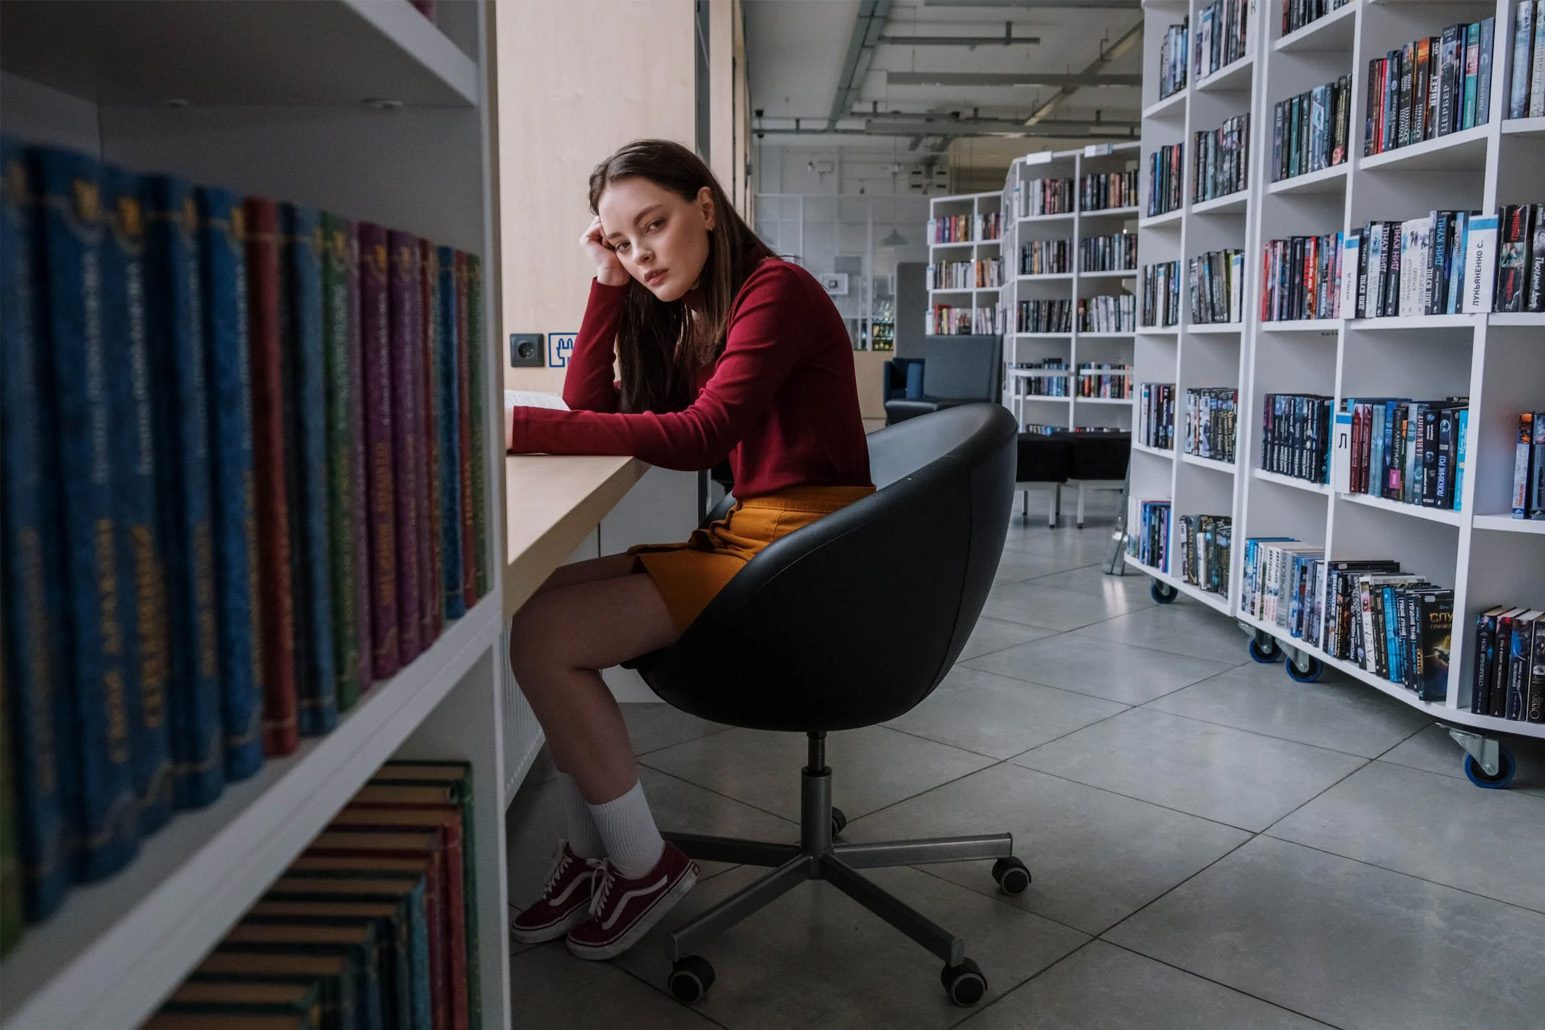 A girl sitting at a desk in a library.